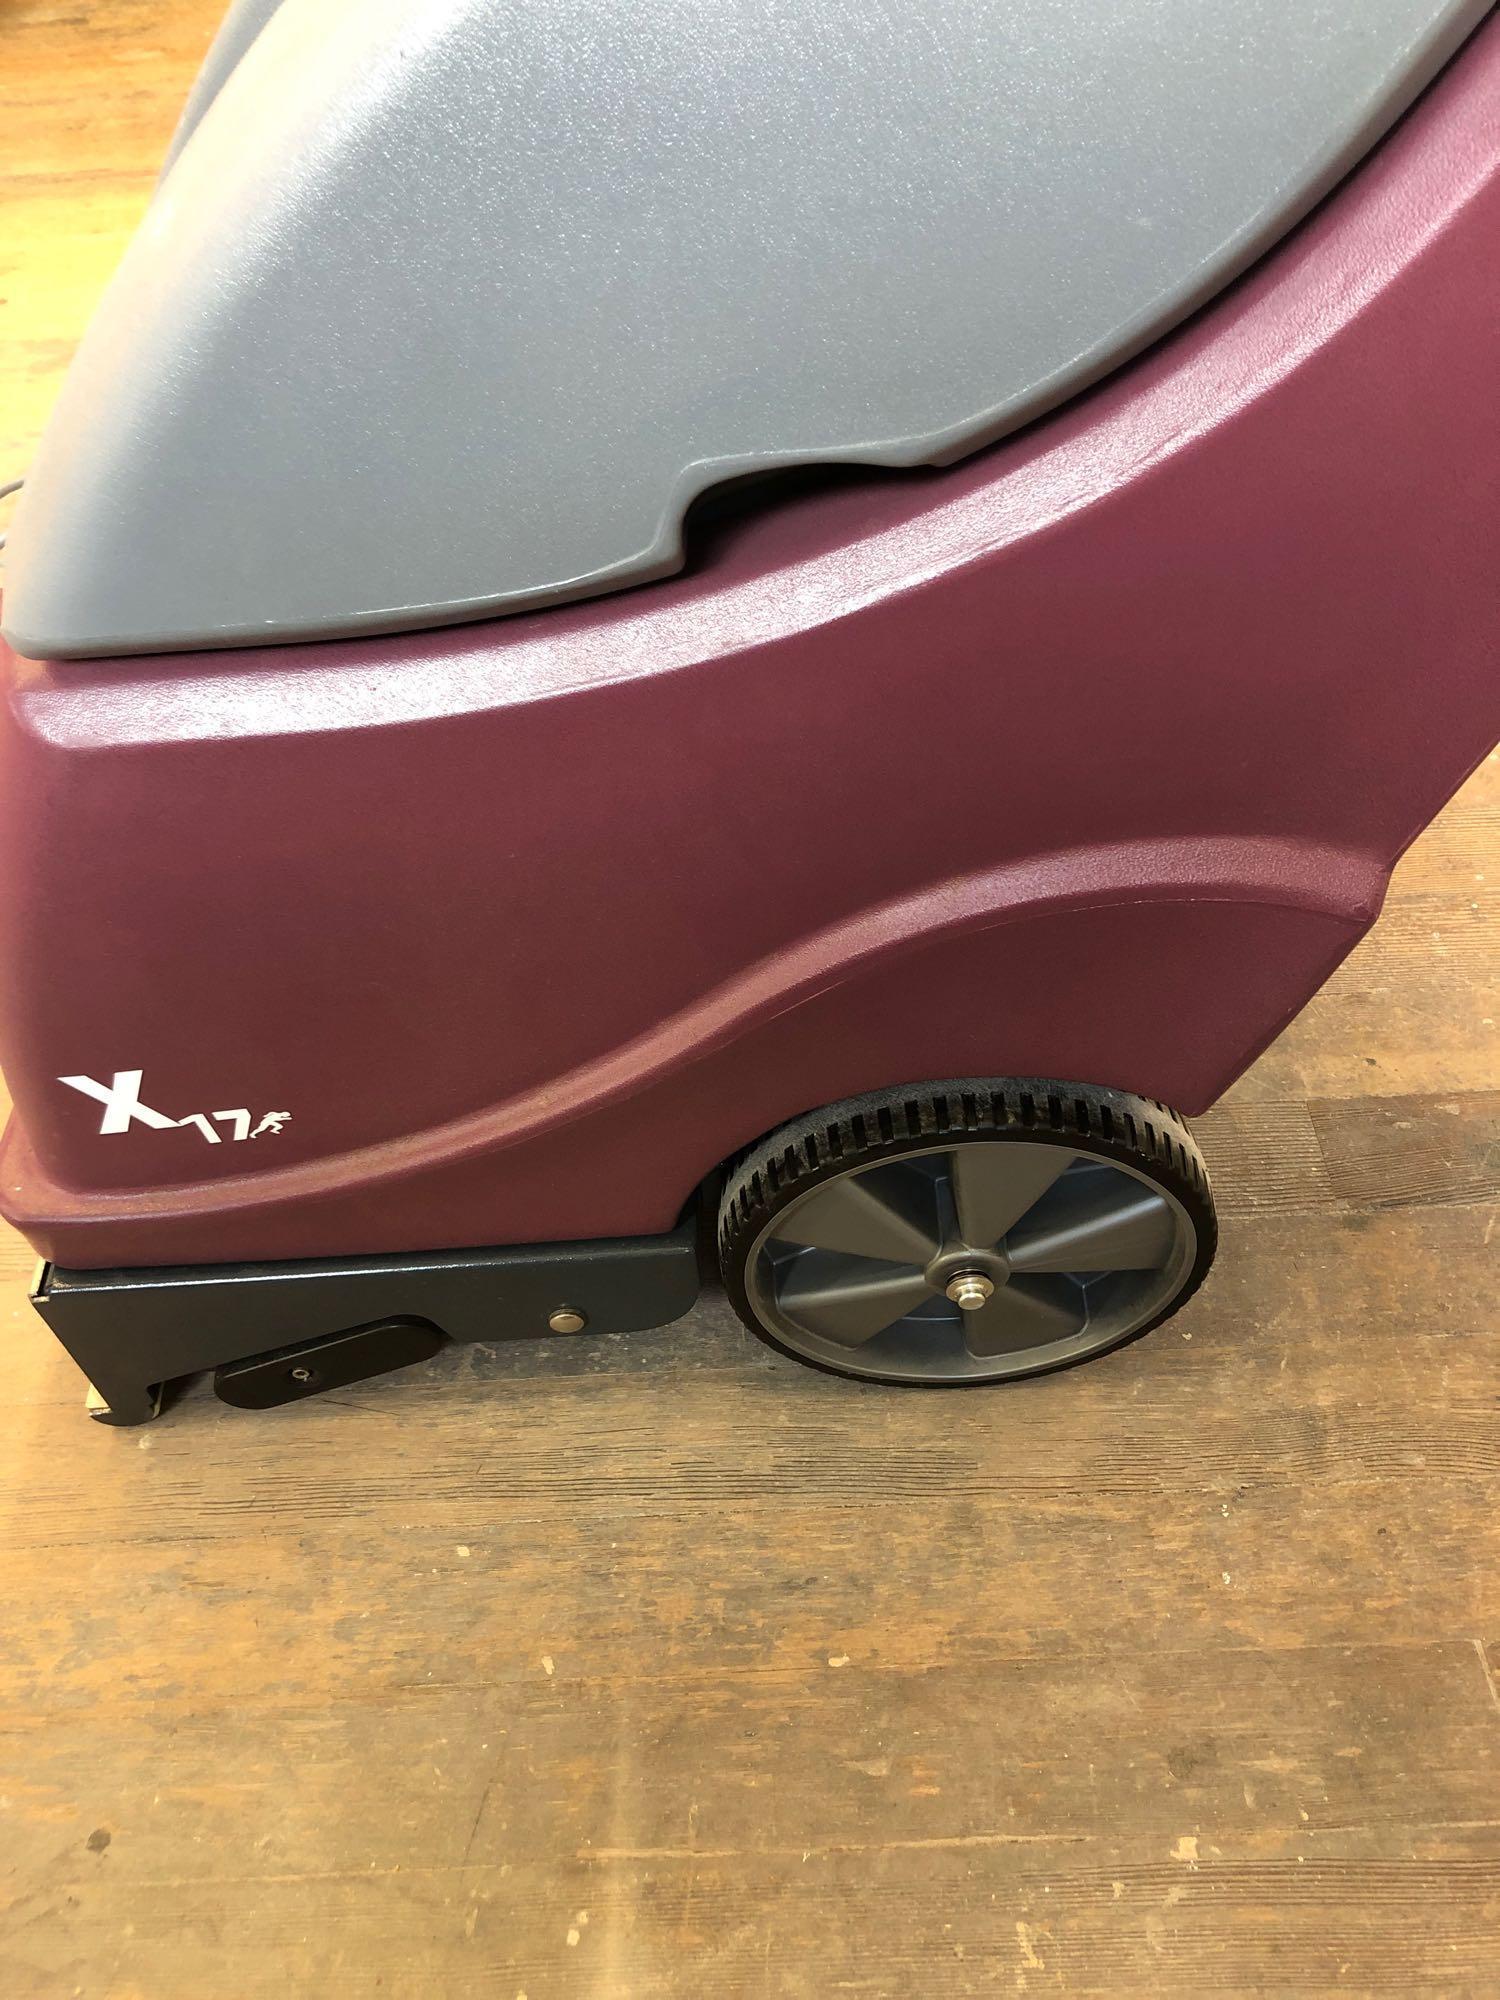 Minuteman industrial carpet cleaner used 2 times Model X17115 Voltage 120 AC AMPS 12 comes with RAMP